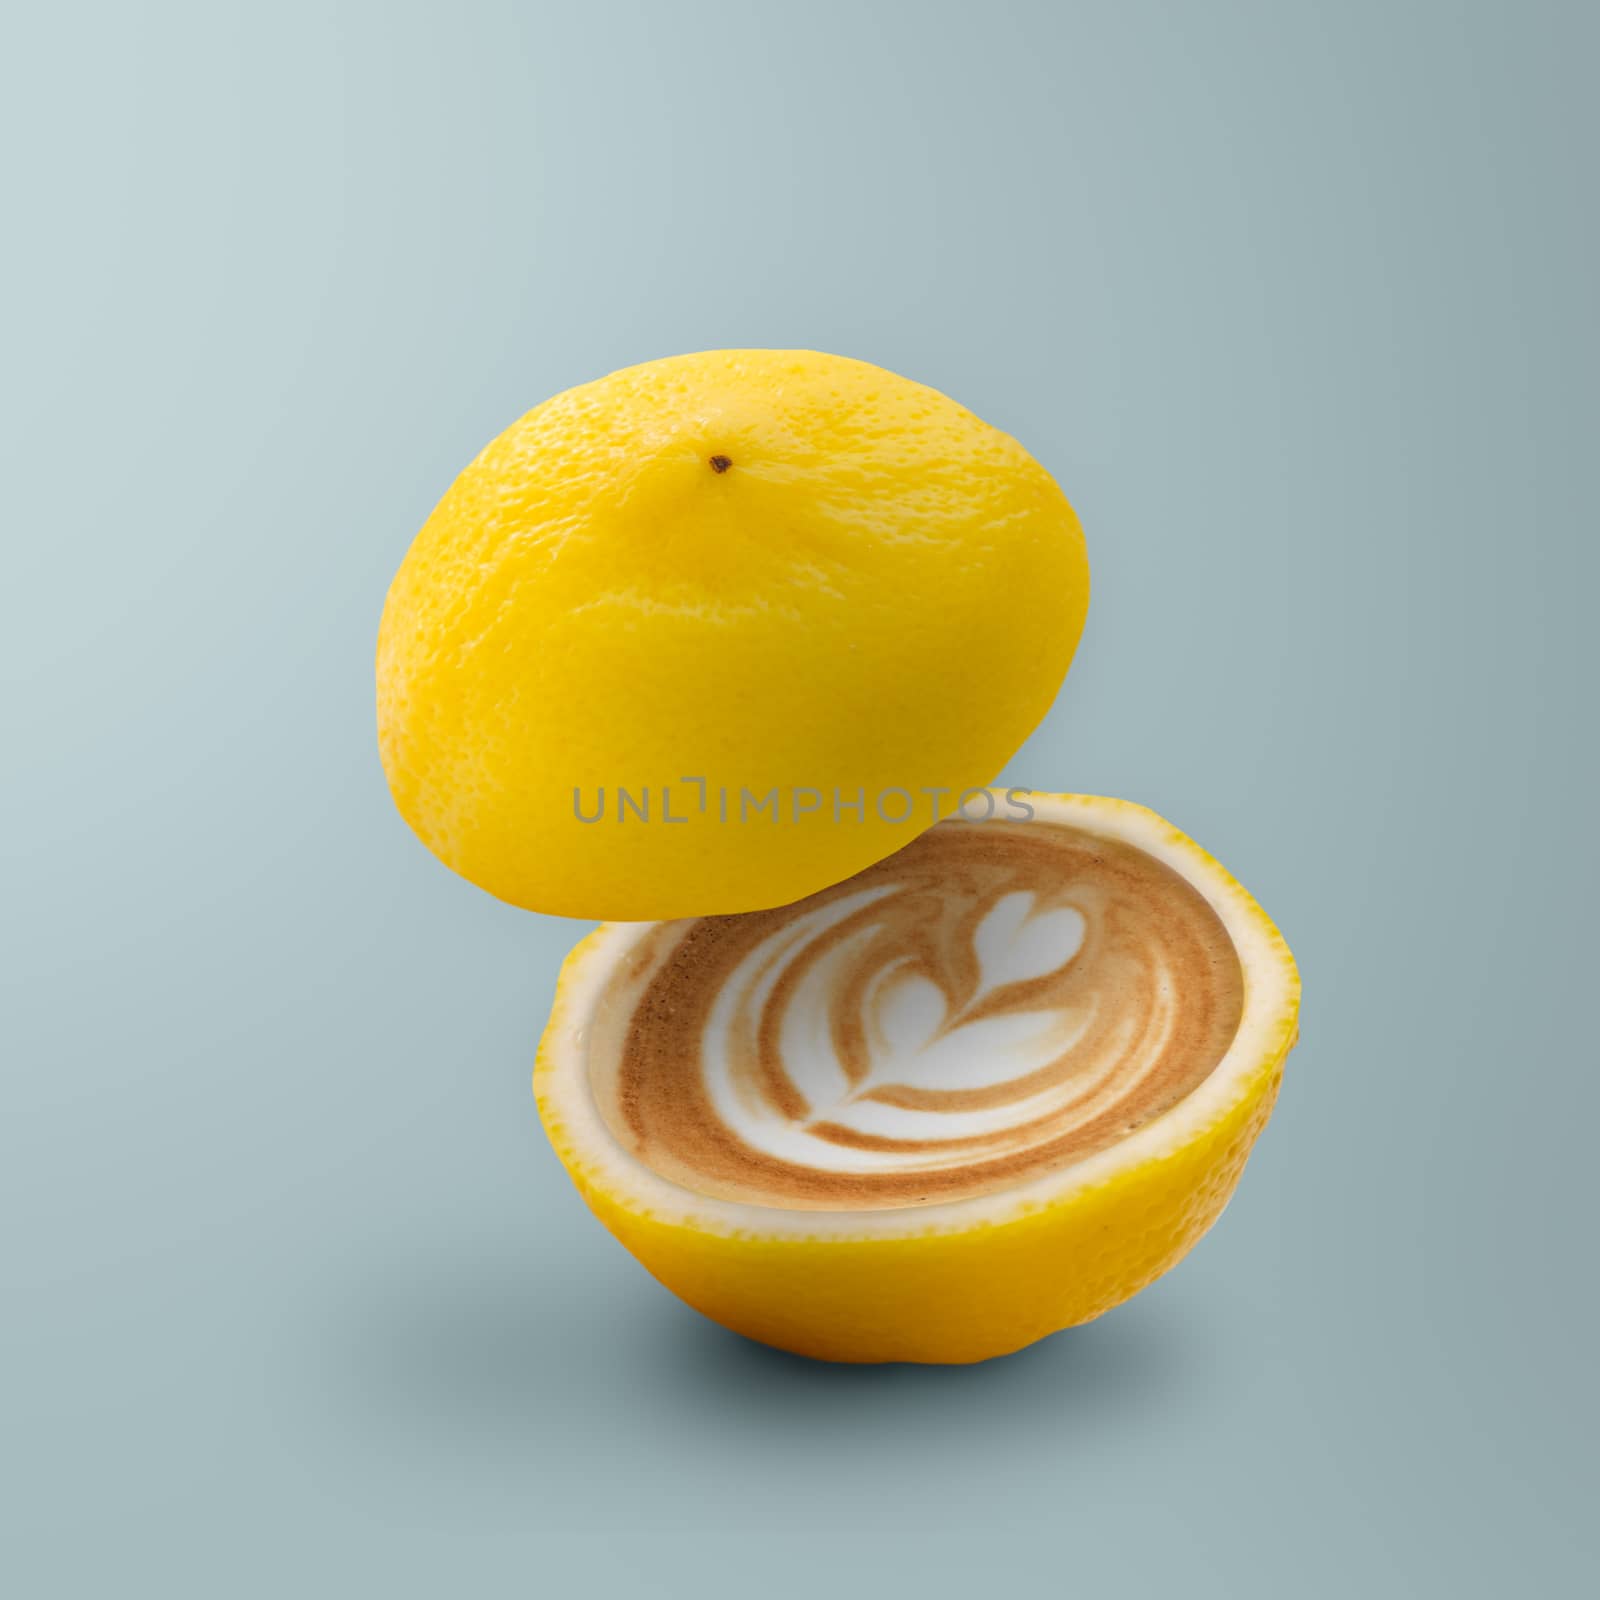 Contemporary art of Lemon with coffee inside on blue background by feelartfeelant